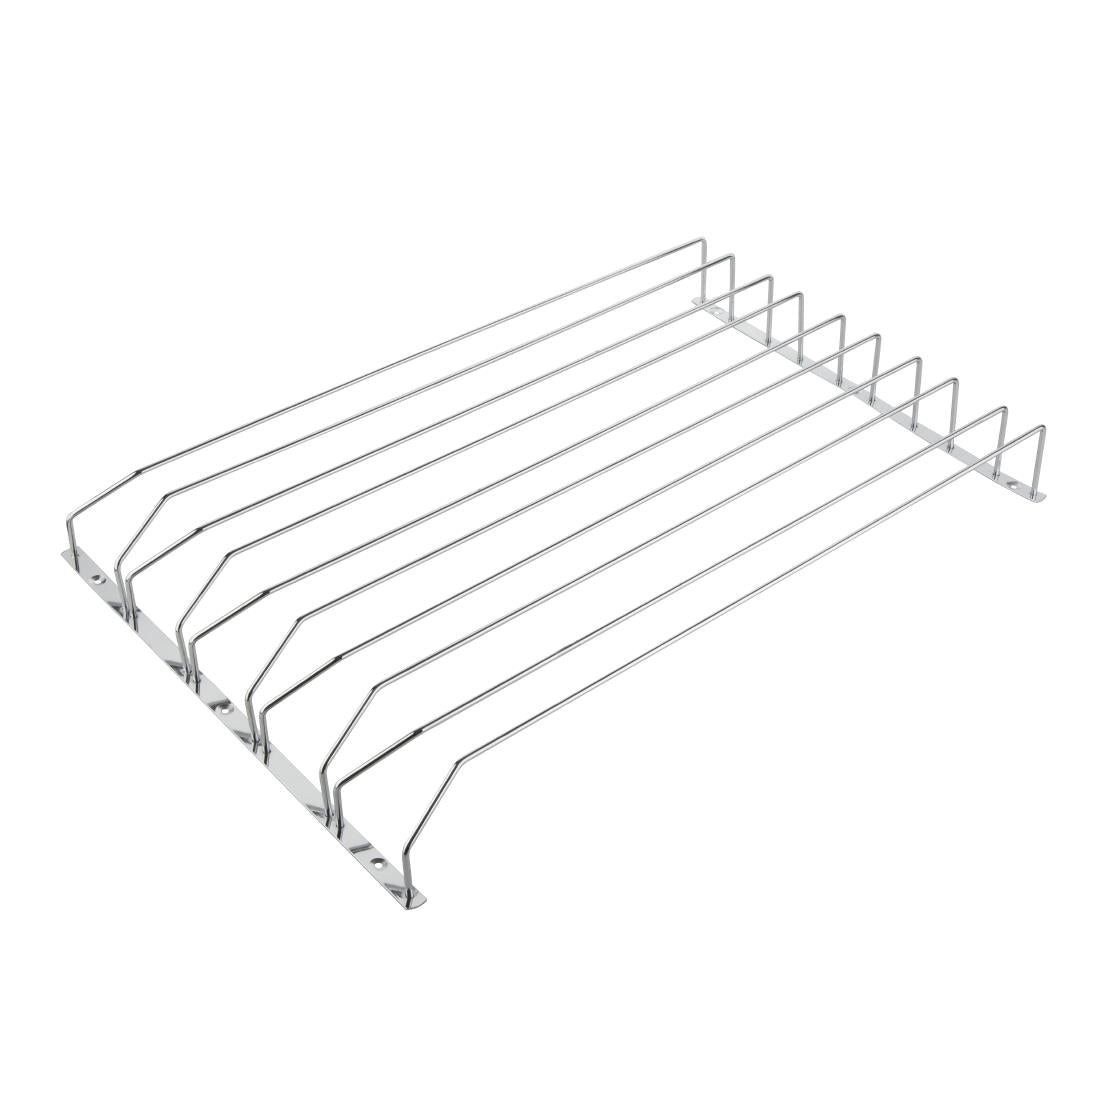 GH057 Olympia Wine Glass Rack JD Catering Equipment Solutions Ltd